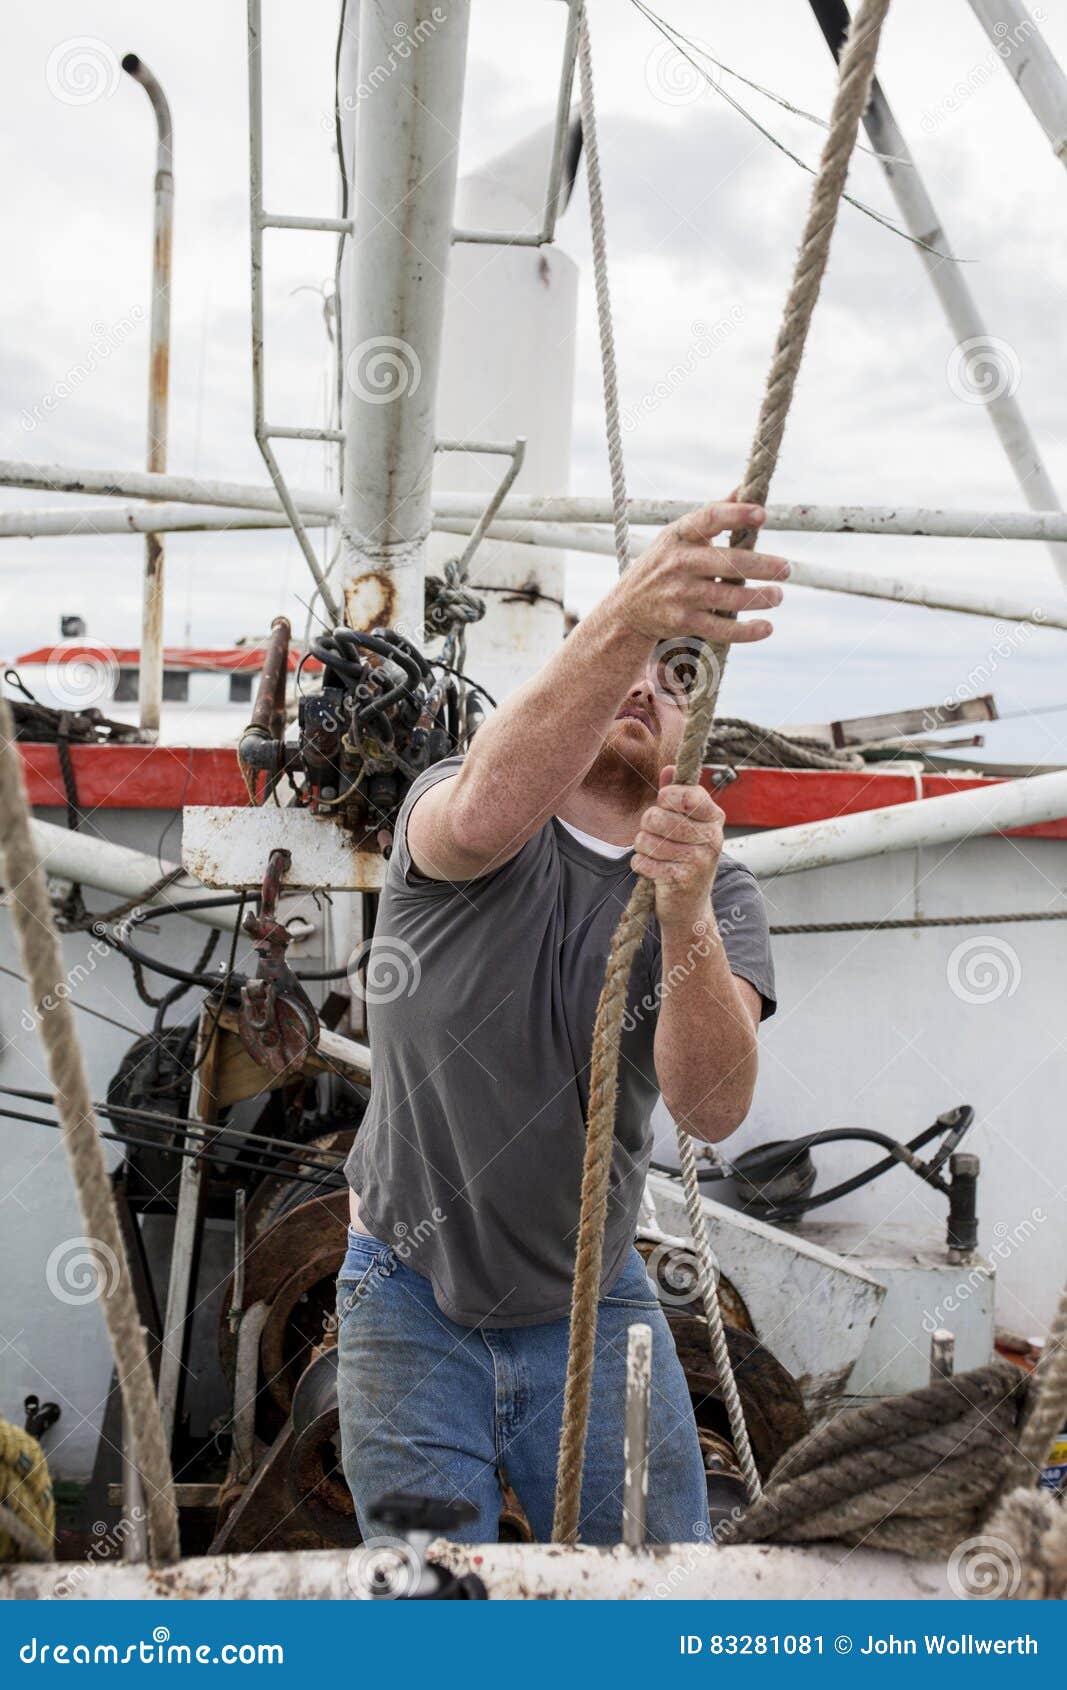 deckhand working on boat in south carolina stock image